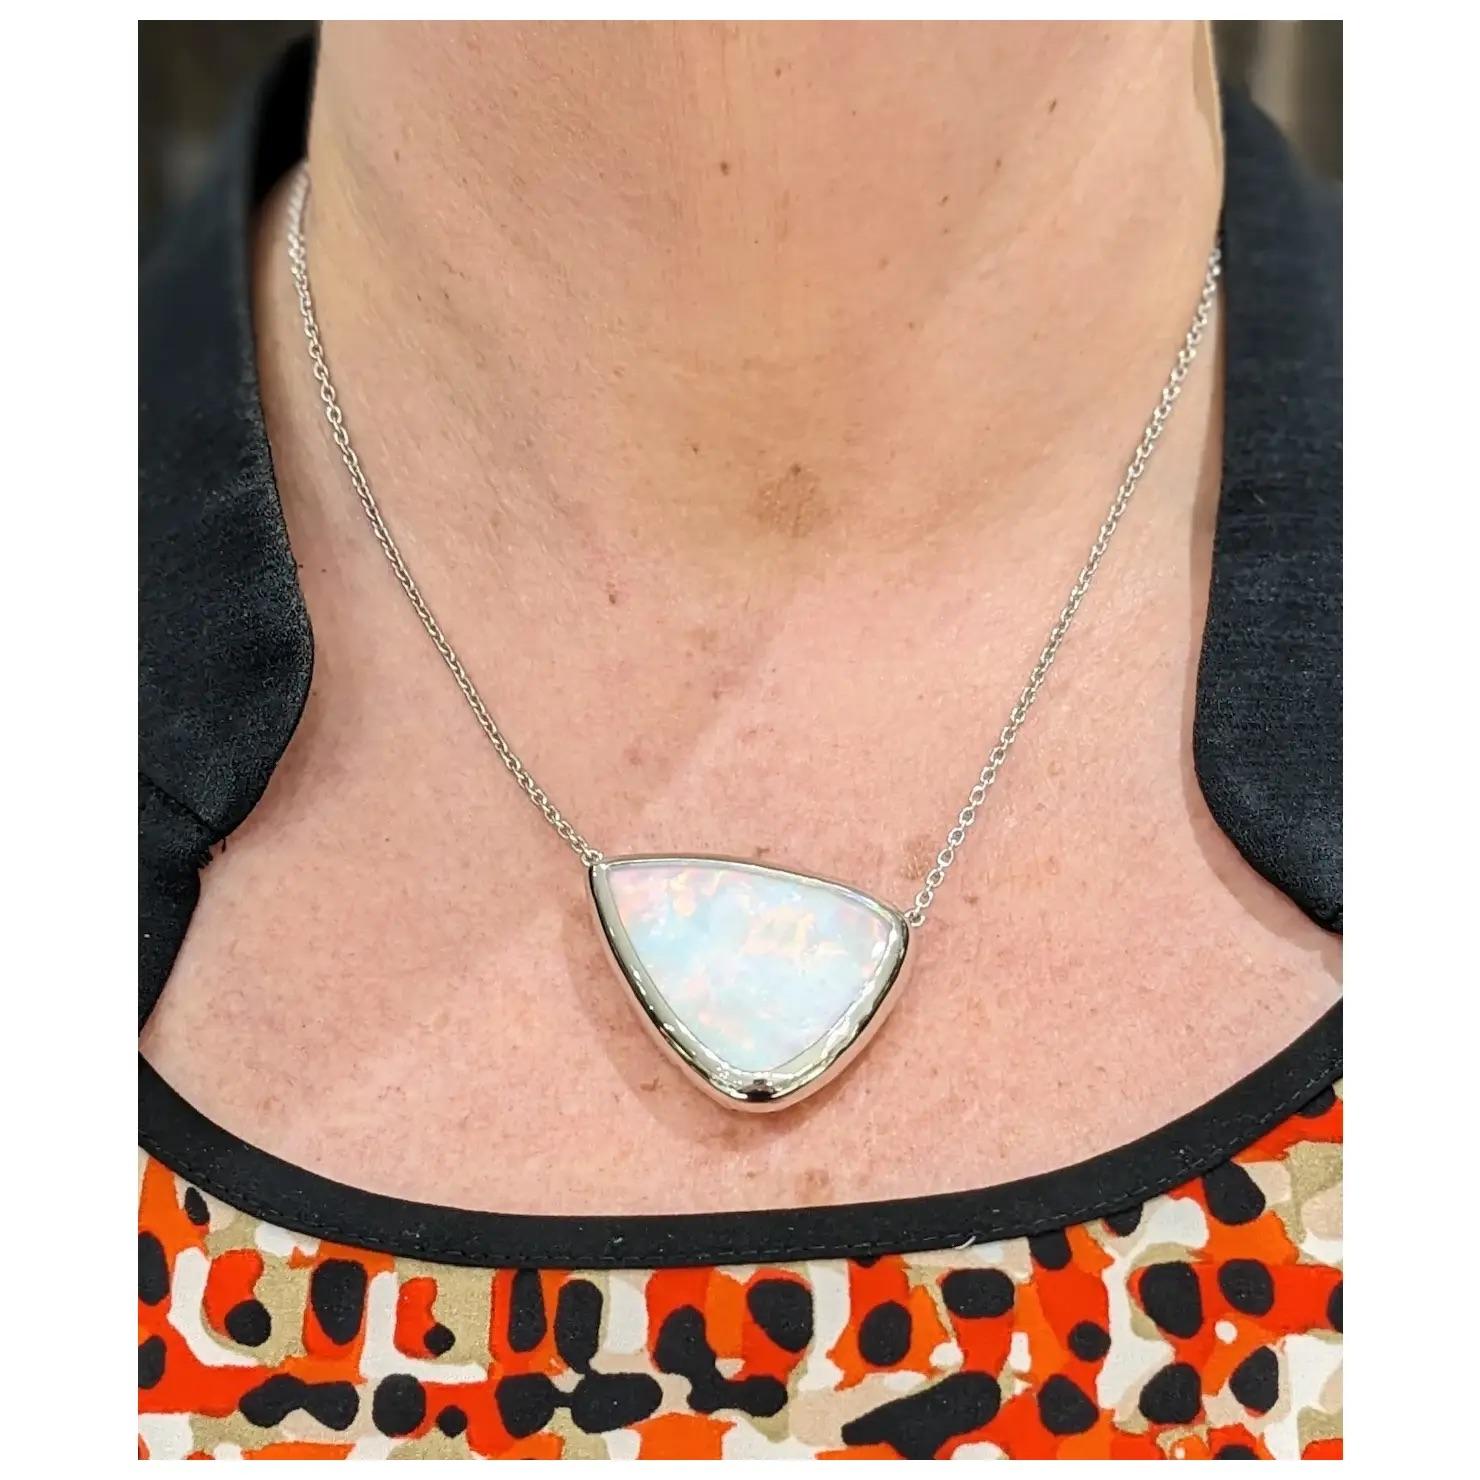 Prismatic 55.32ct Brazilian Opal Modern Pendant Necklace

Presenting a luminous 55.32ct Brazilian Opal pendant necklace, intricately set in 14k white gold. This modern piece showcases a dazzling pear-shaped Brazilian Opal, glowing with unmatched